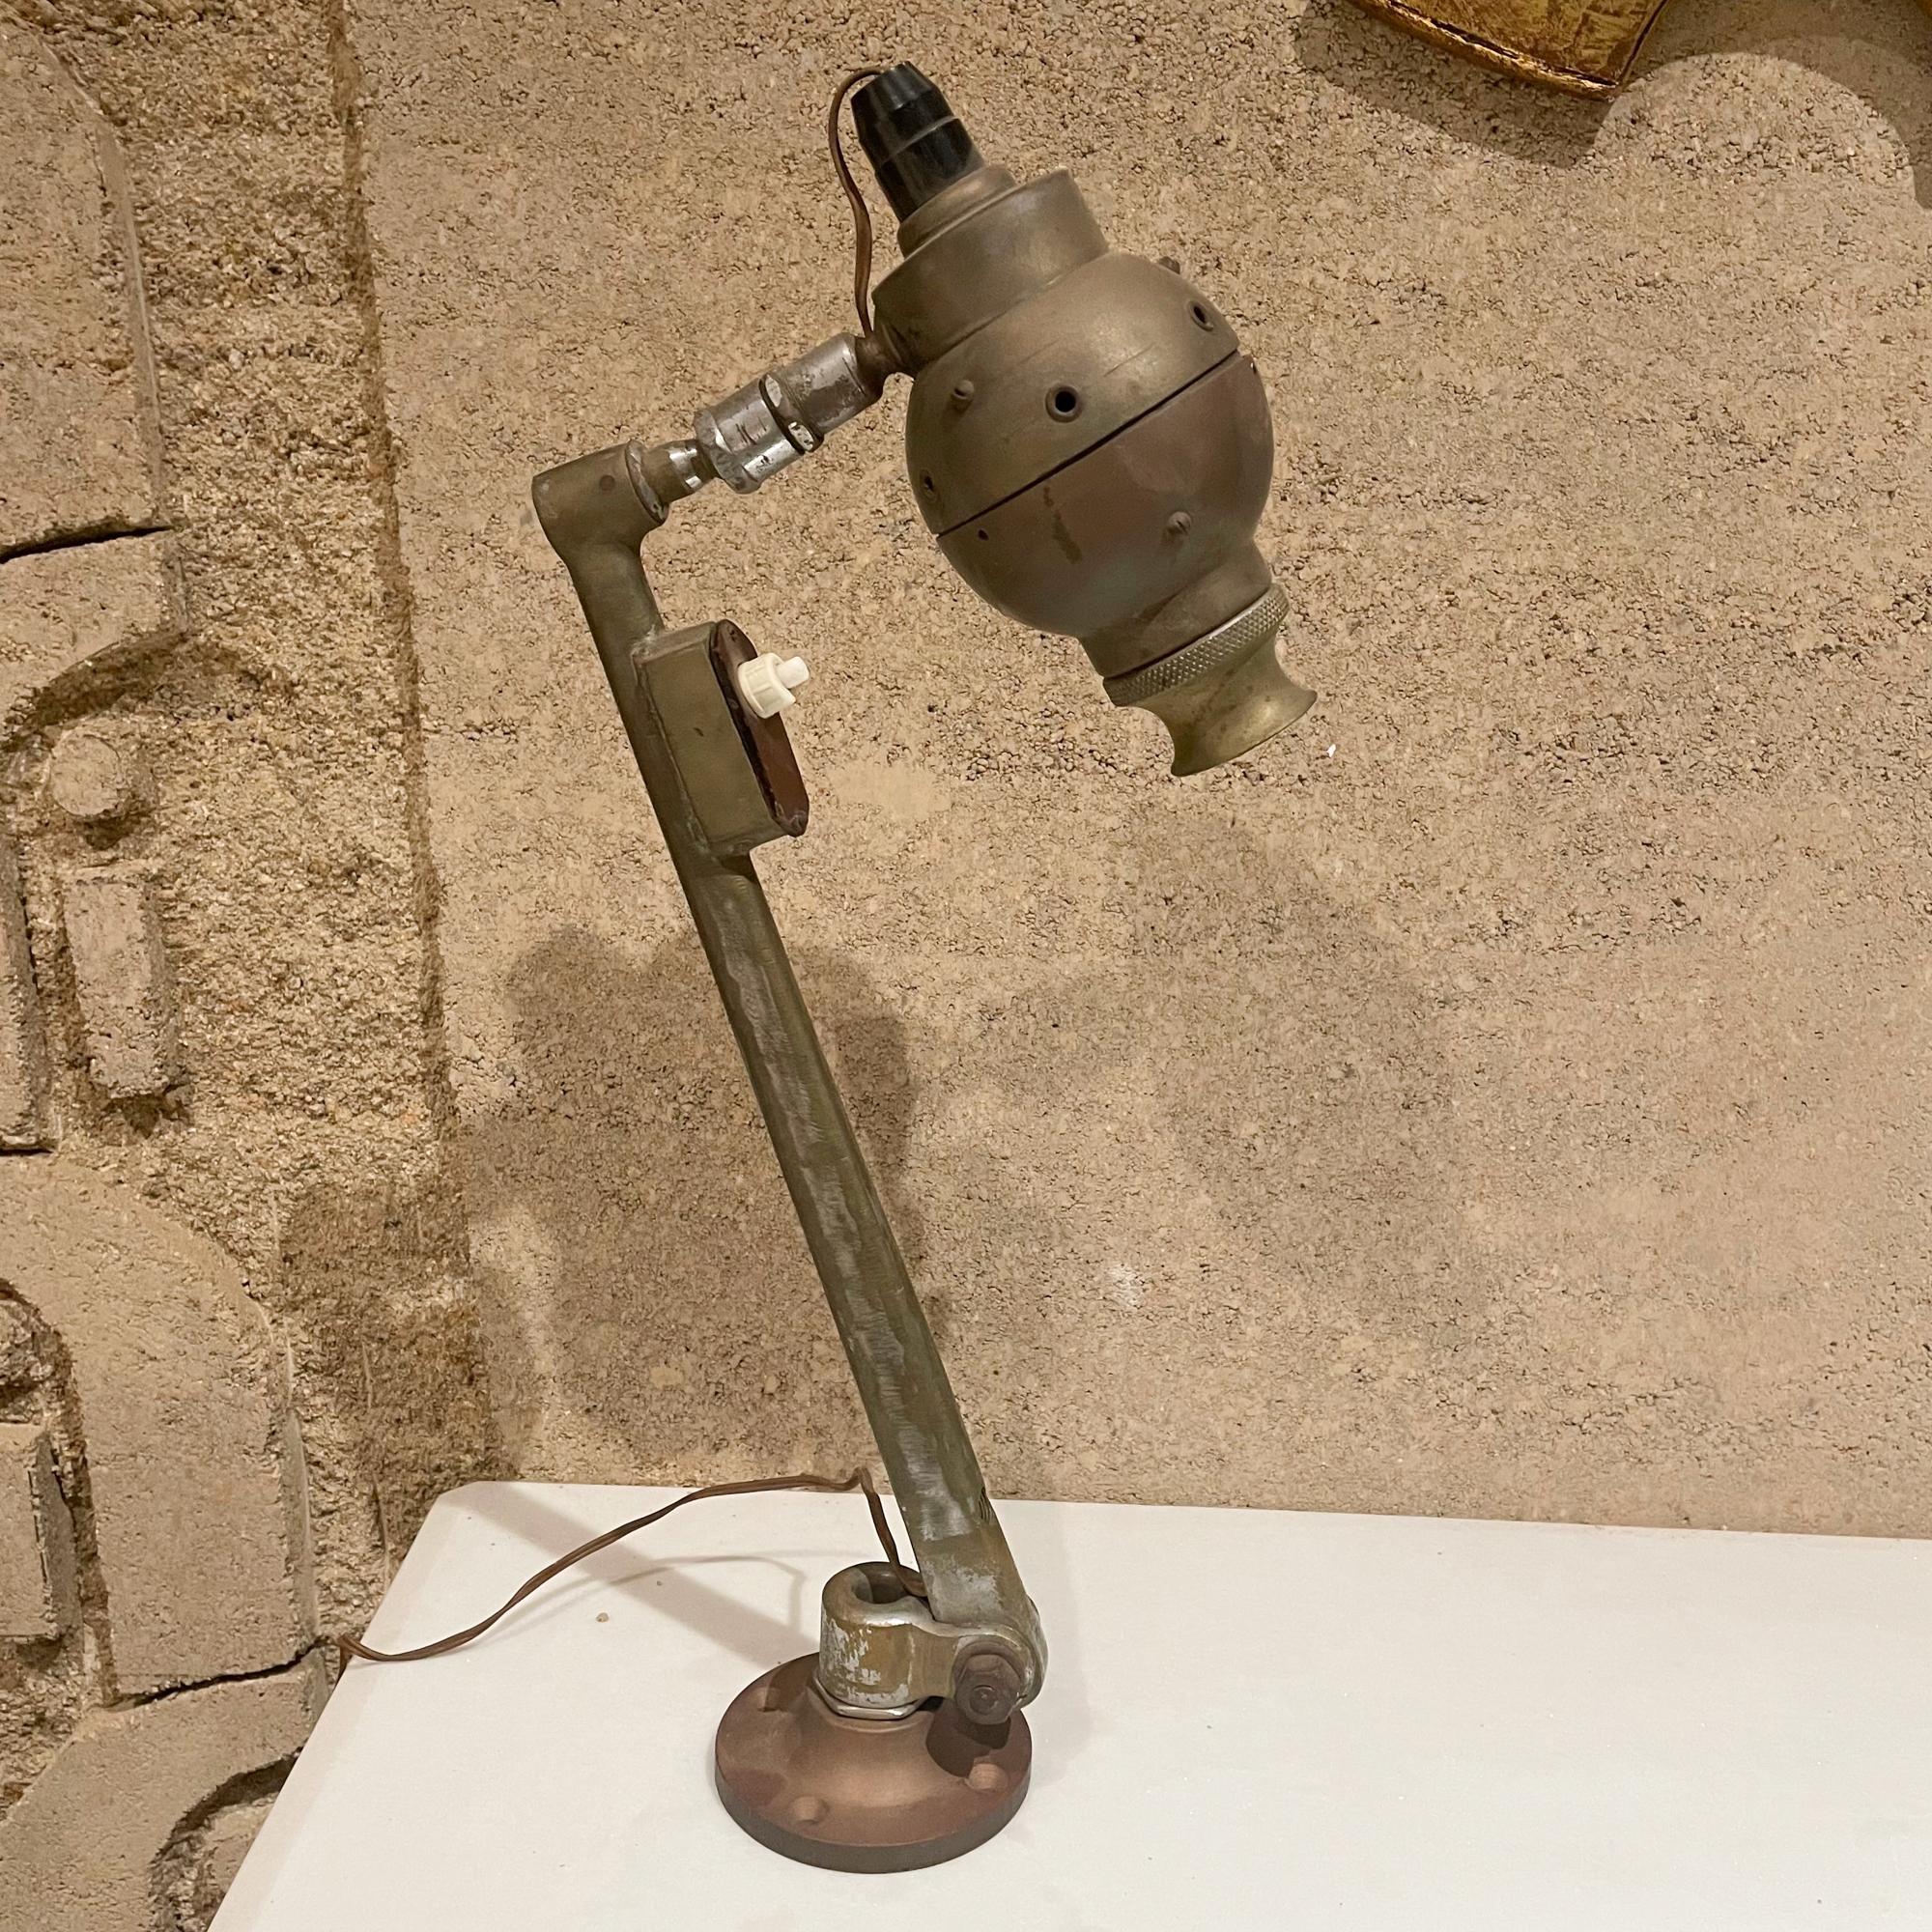 Lamp
Similar to style of Oscar Torlasco Milan Italy for Lumi model 533- an industrial table desk lamp in patinated brass
Unidentified. Unmarked. No design verification is present. Lamp acquired in Italy.
Measures: 15H x 6D x 3.25 W